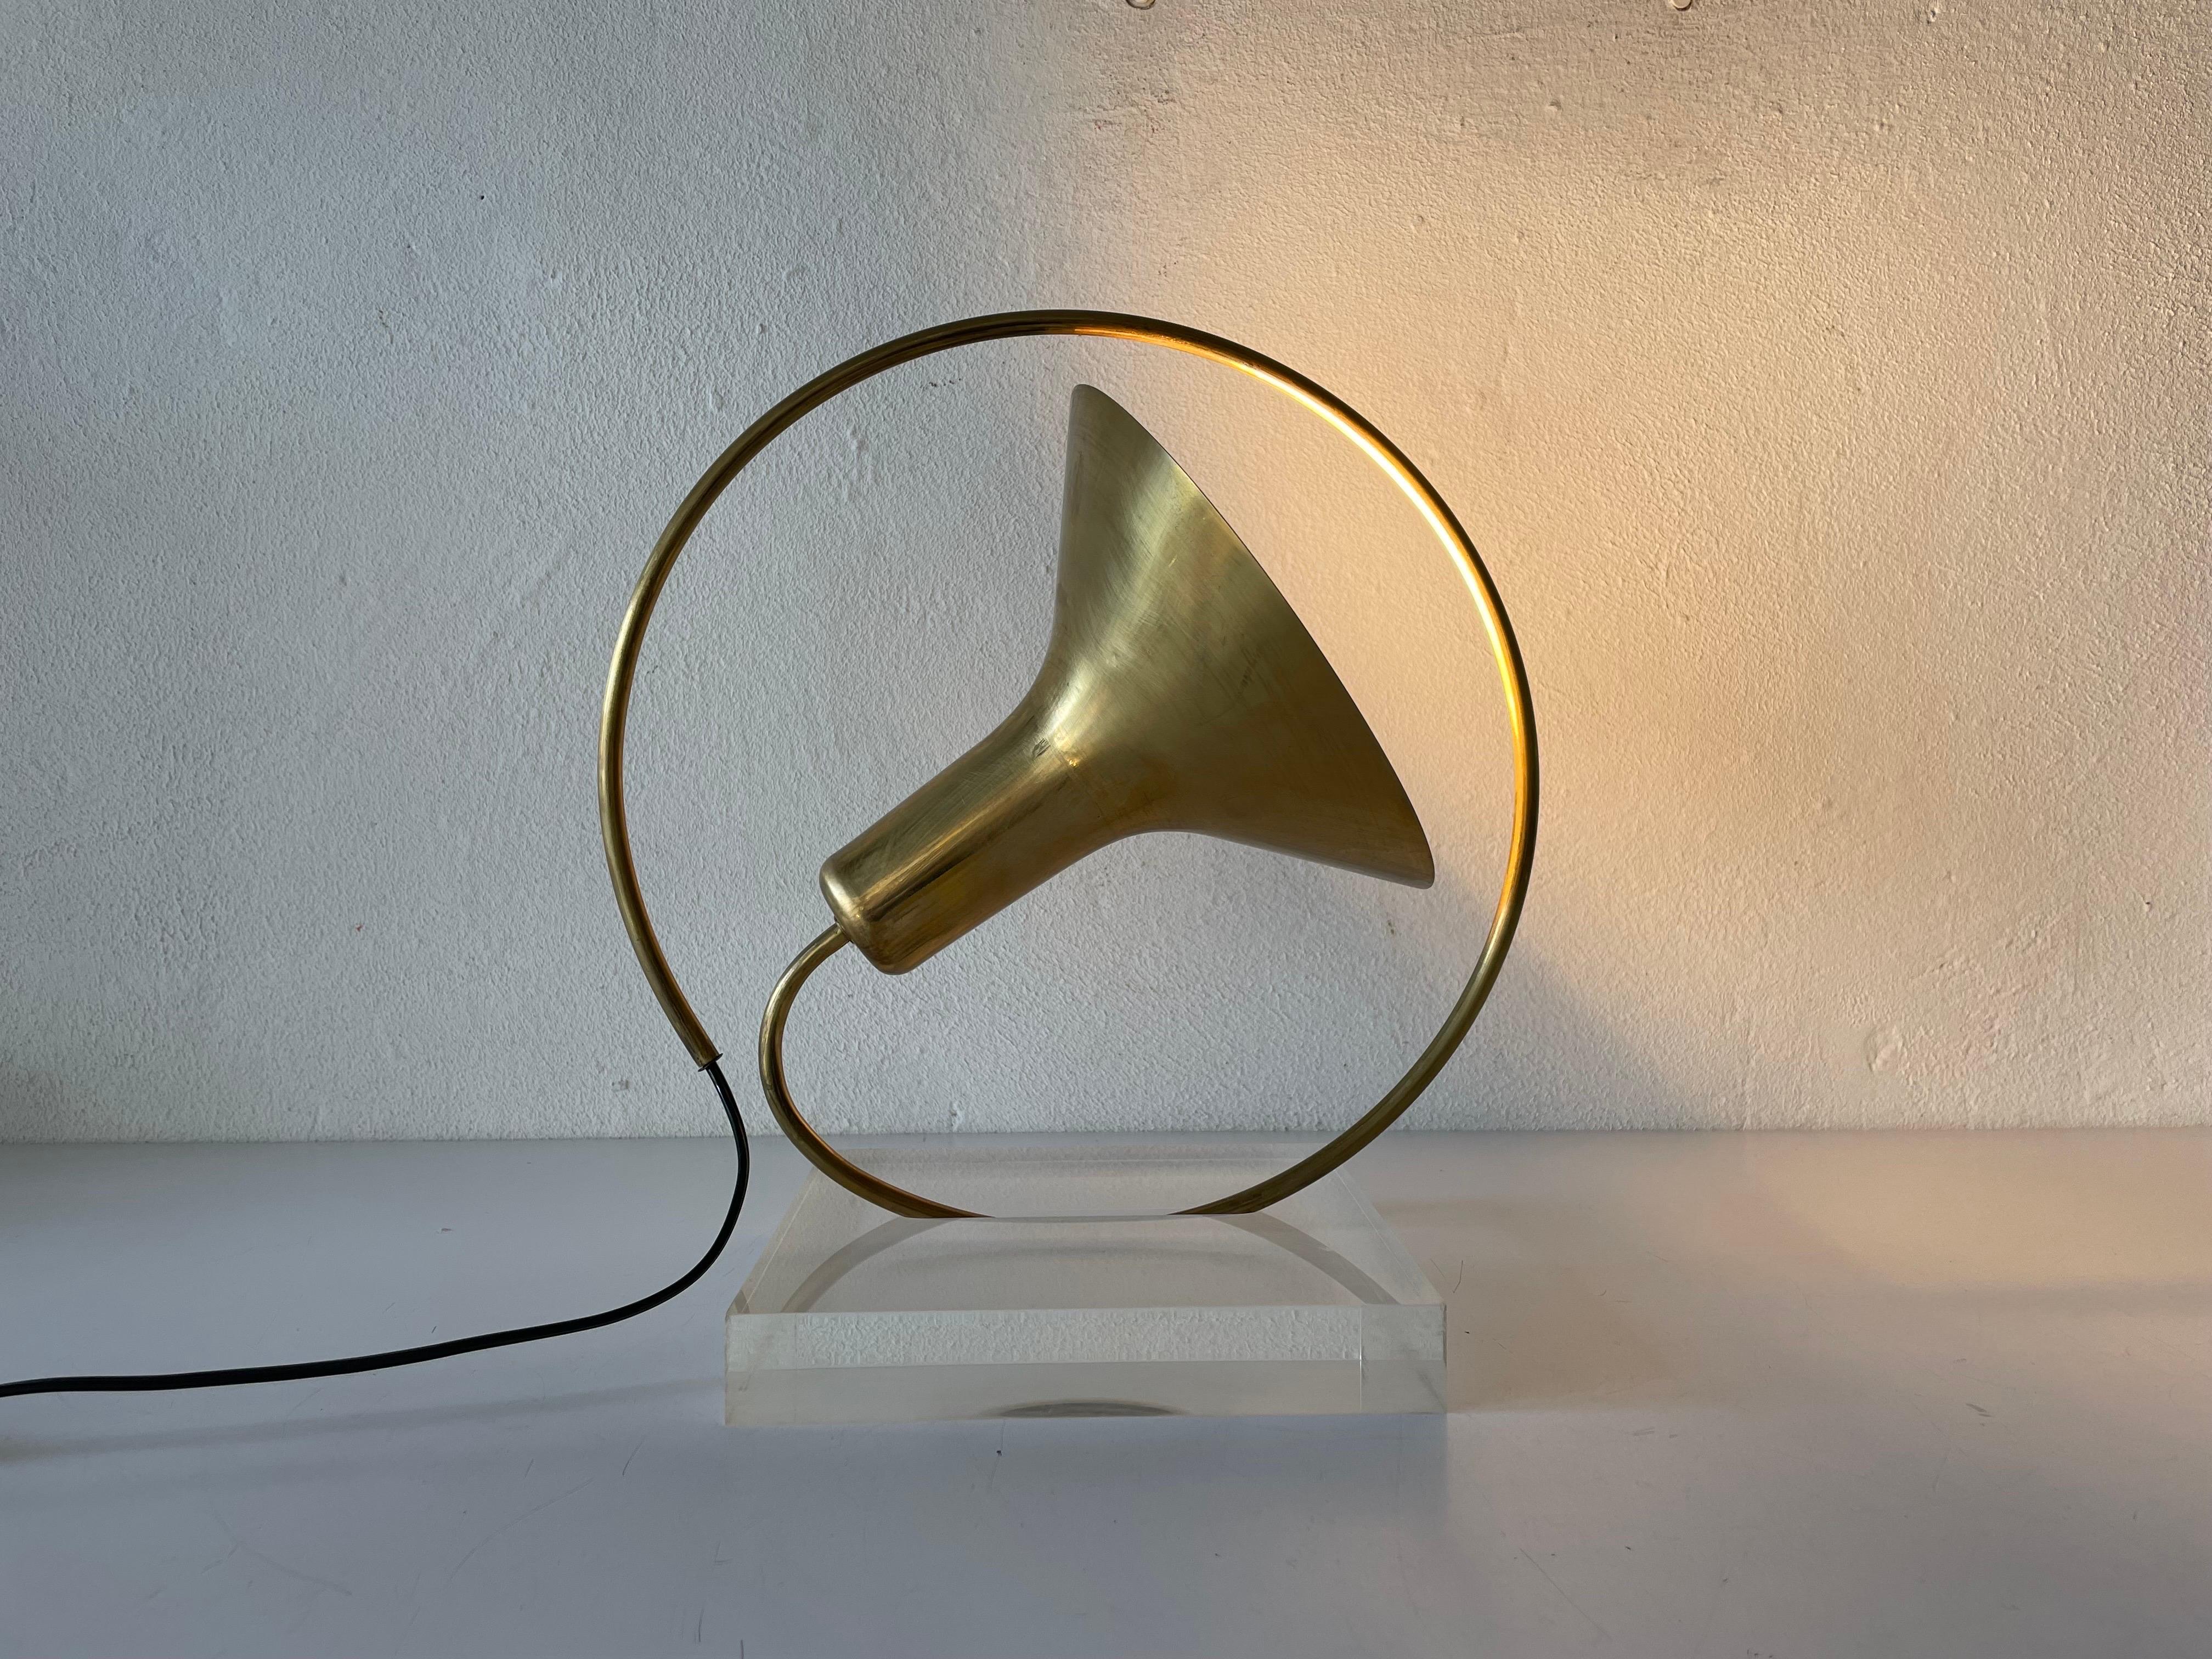 Brass & Lucite Trumpet Design Table Lamp, 1960s, Italy For Sale 5